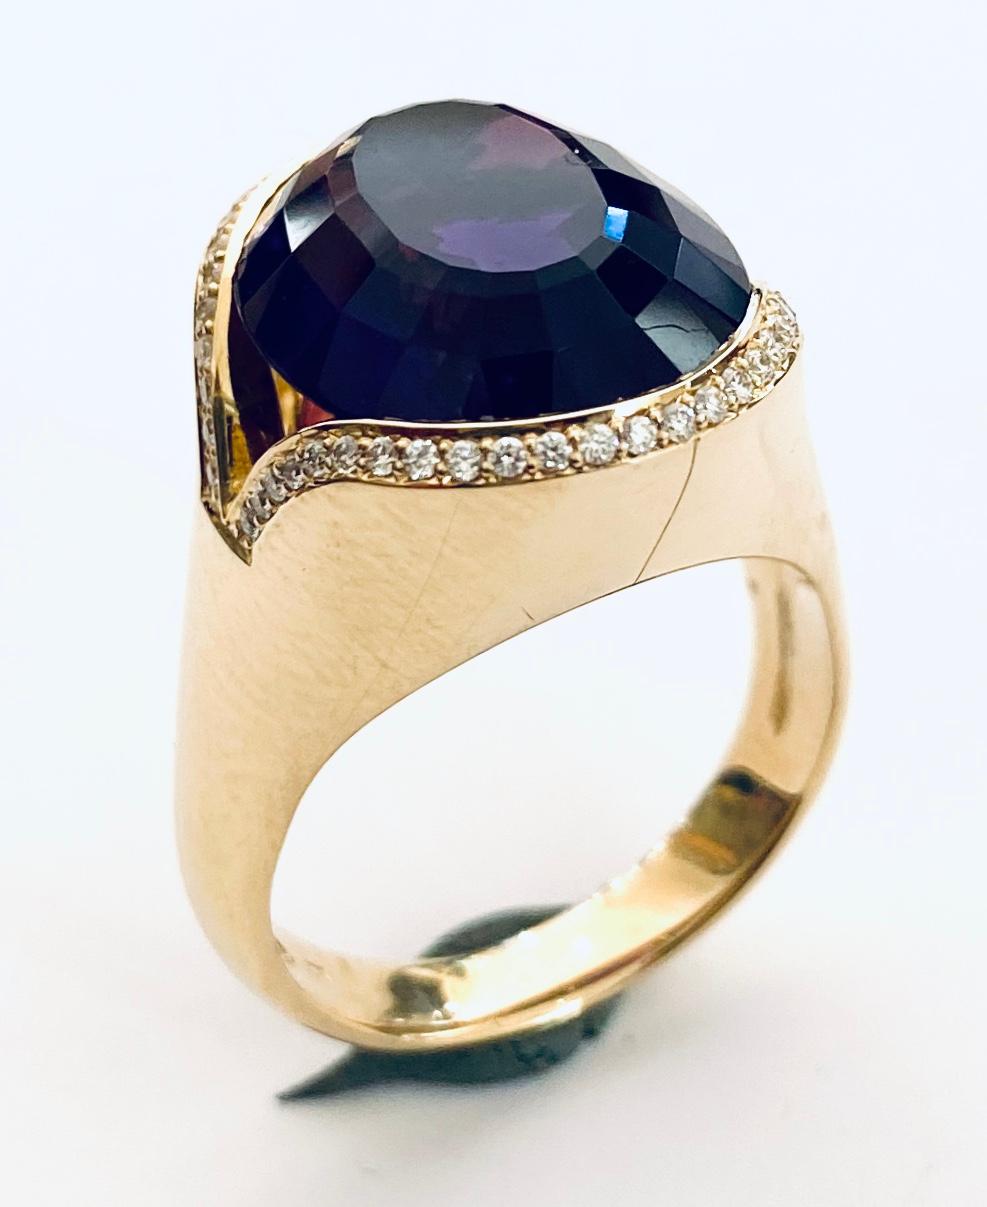 - One 18K. Yeloow Gold Ring.  Hand madew ring with a beautifull amathist  
- 1 center Stone: Natural Quartz: Amethist 10.60 ct (Extra Fine Color Quality)
- 50 Side Stones; Natural Diamond, Round Brilliant = 0.23 ct. VVS/VSI/Top Wesselton
- Germany